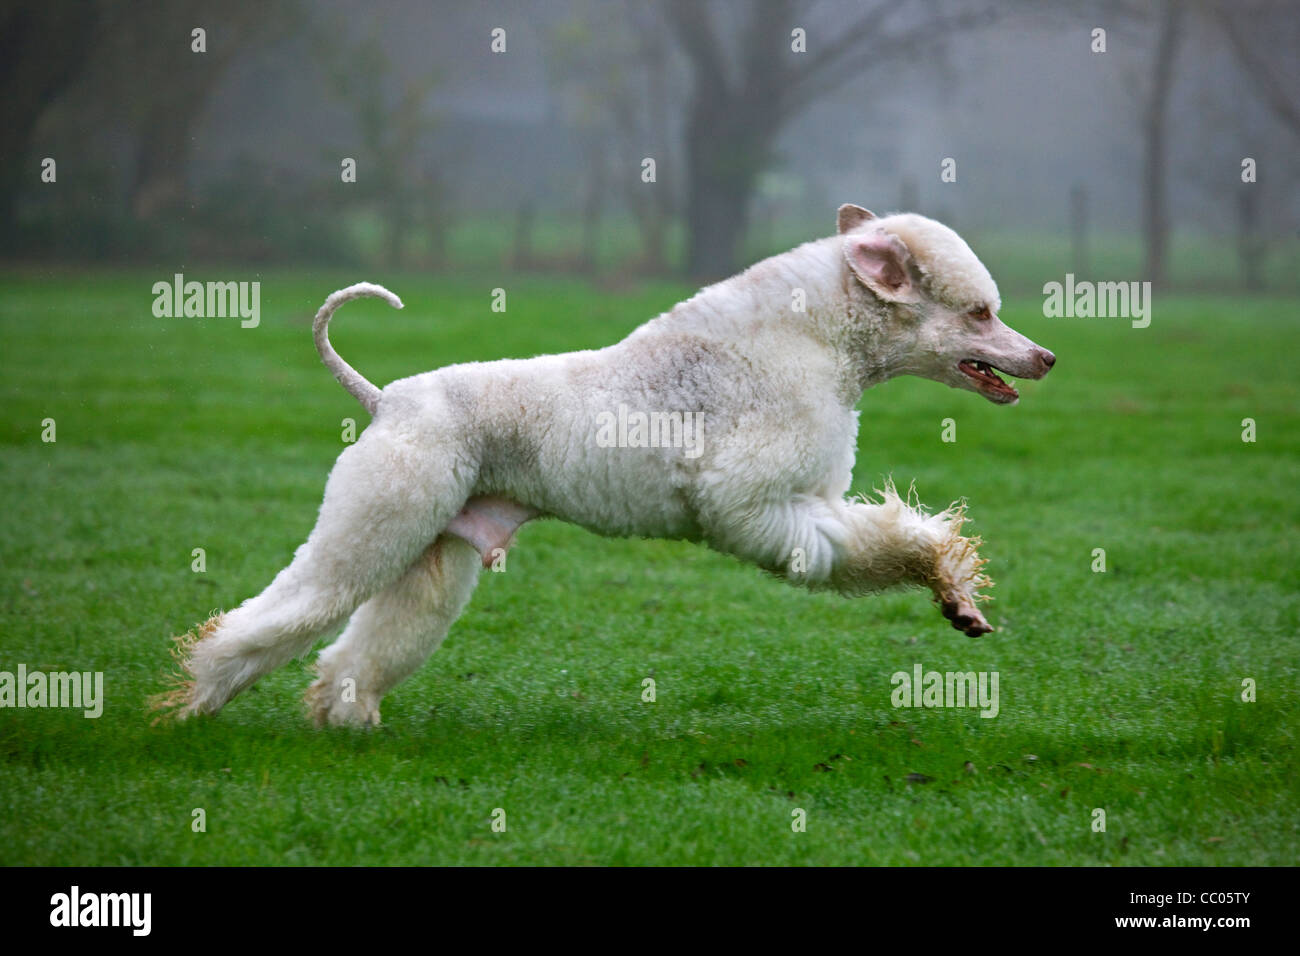 White standard poodle (Canis lupus familiaris) running in garden Stock Photo